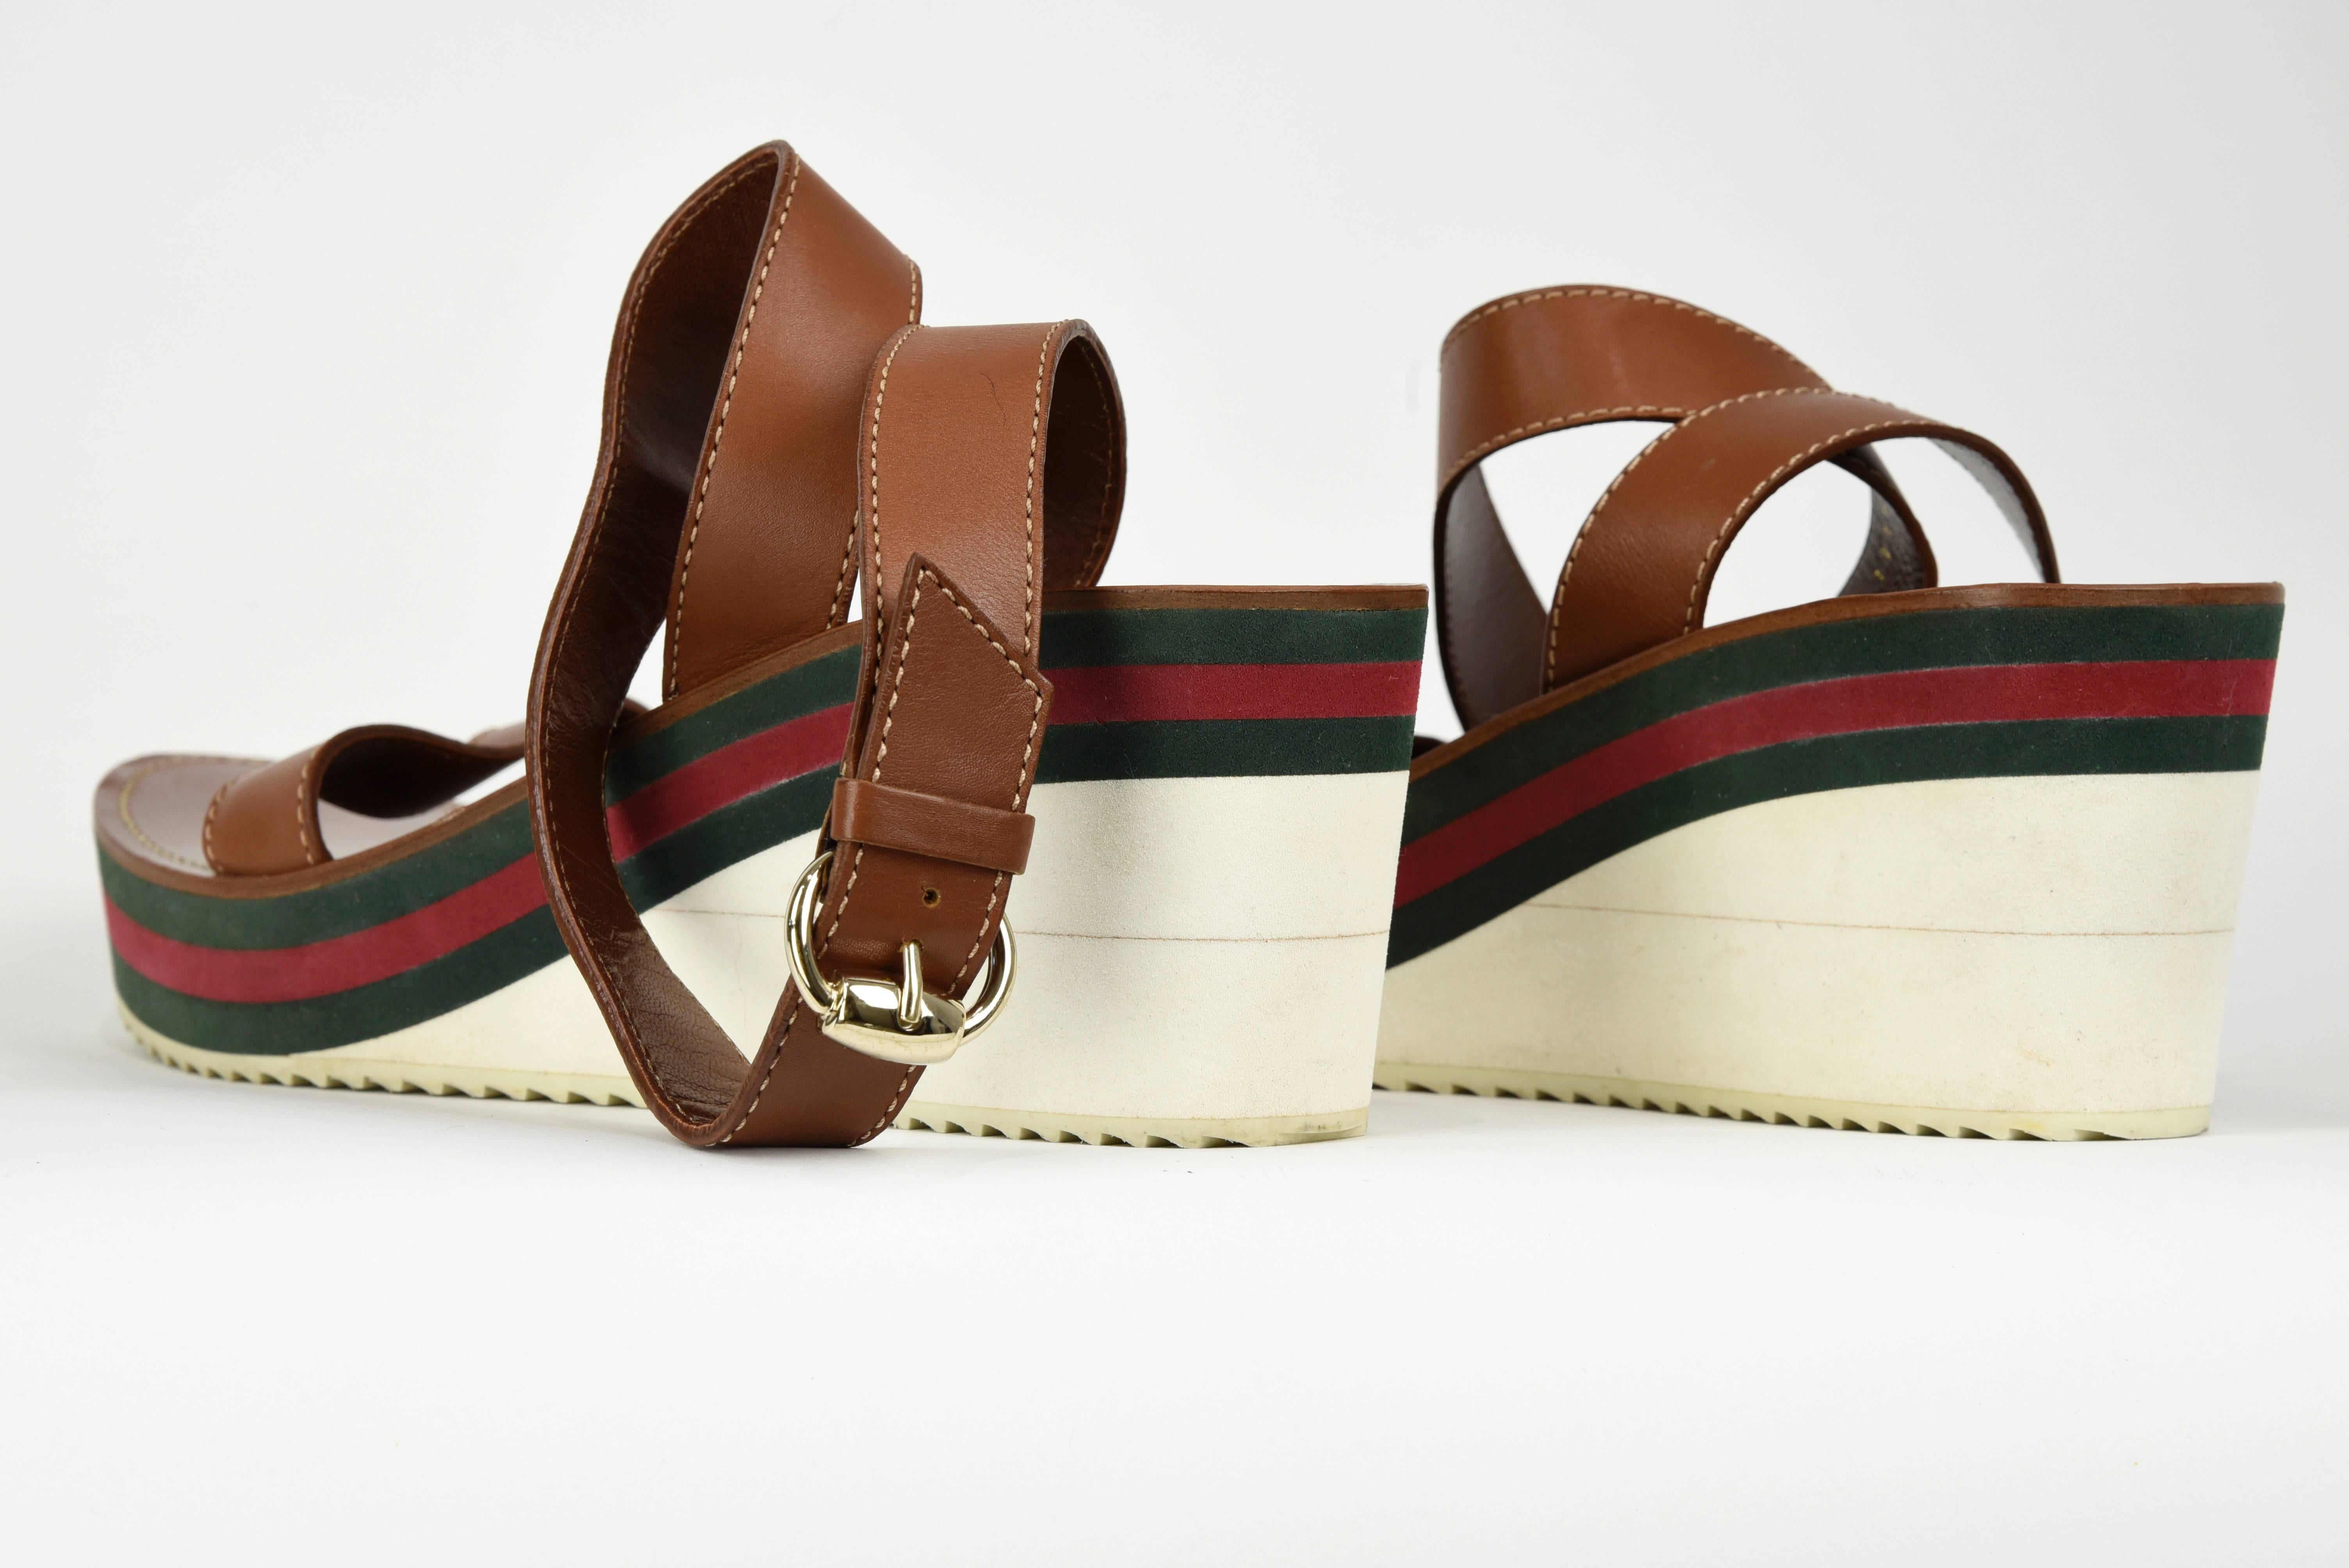 Recognizable bold red and green Gucci stripe underscores this 3 inch heel platform sandal with simple brown leather ankle wrap. They are simple yet elegant casual in design. Soles have very slight signs of use and the tops are